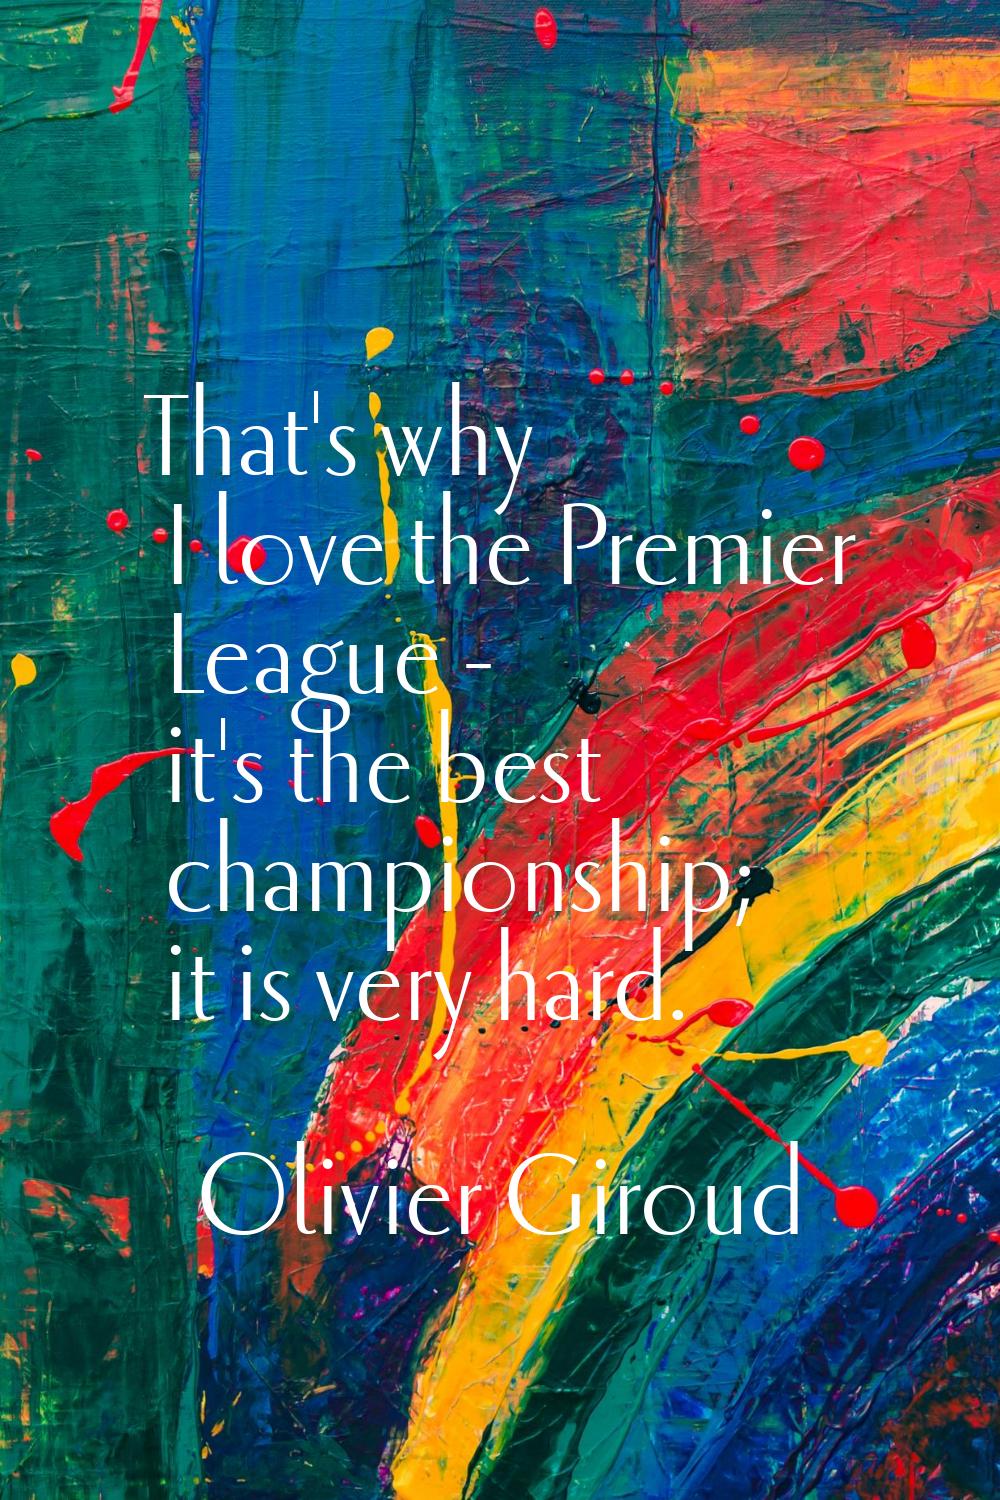 That's why I love the Premier League - it's the best championship; it is very hard.